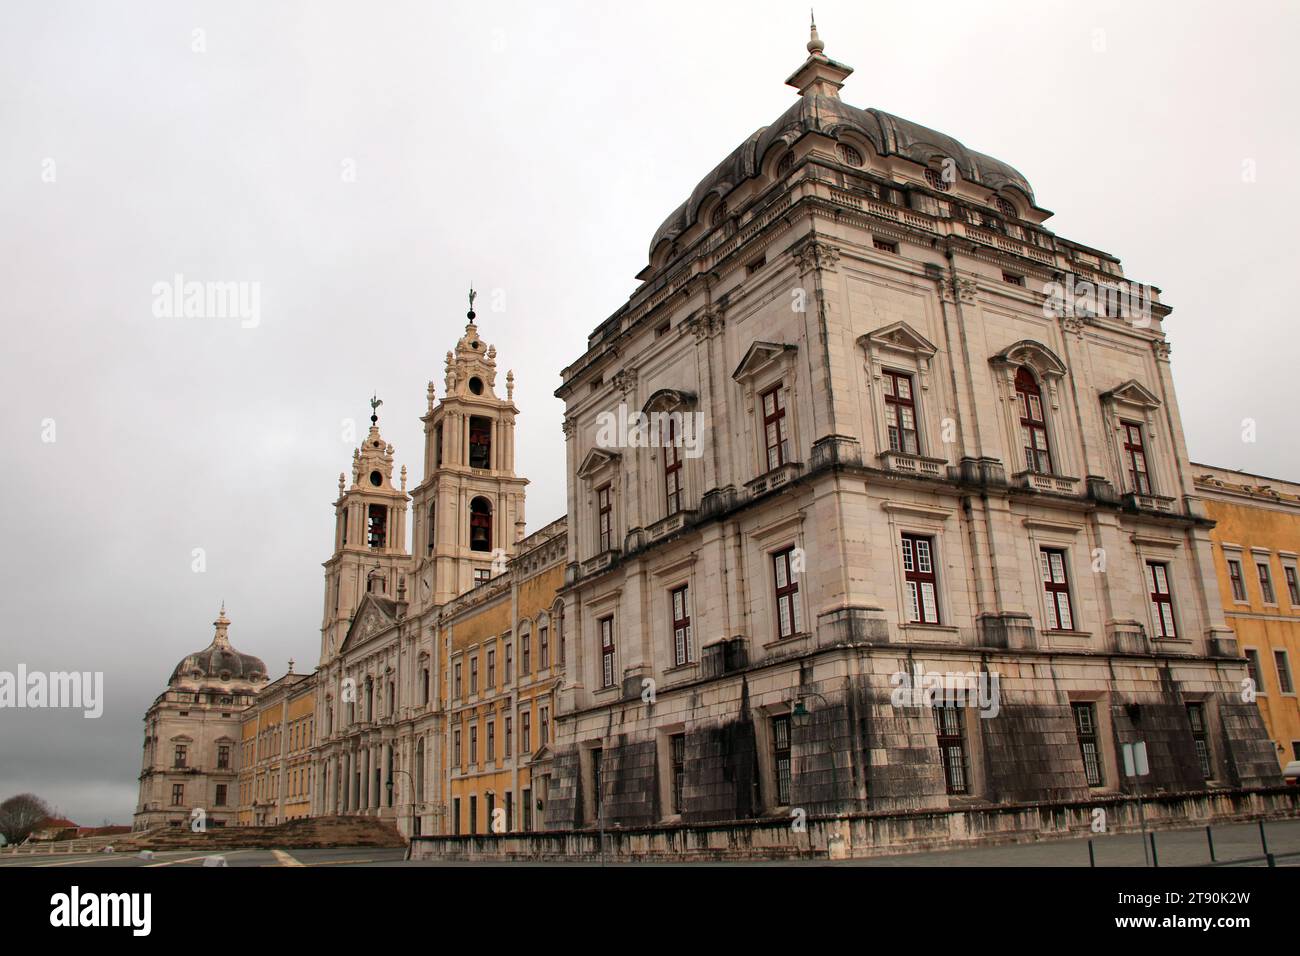 Mafra National Palace is a monumental Baroque and Neoclassical palace-monastery located in Mafra, Portugal, some 28 kilometers from Lisbon Stock Photo